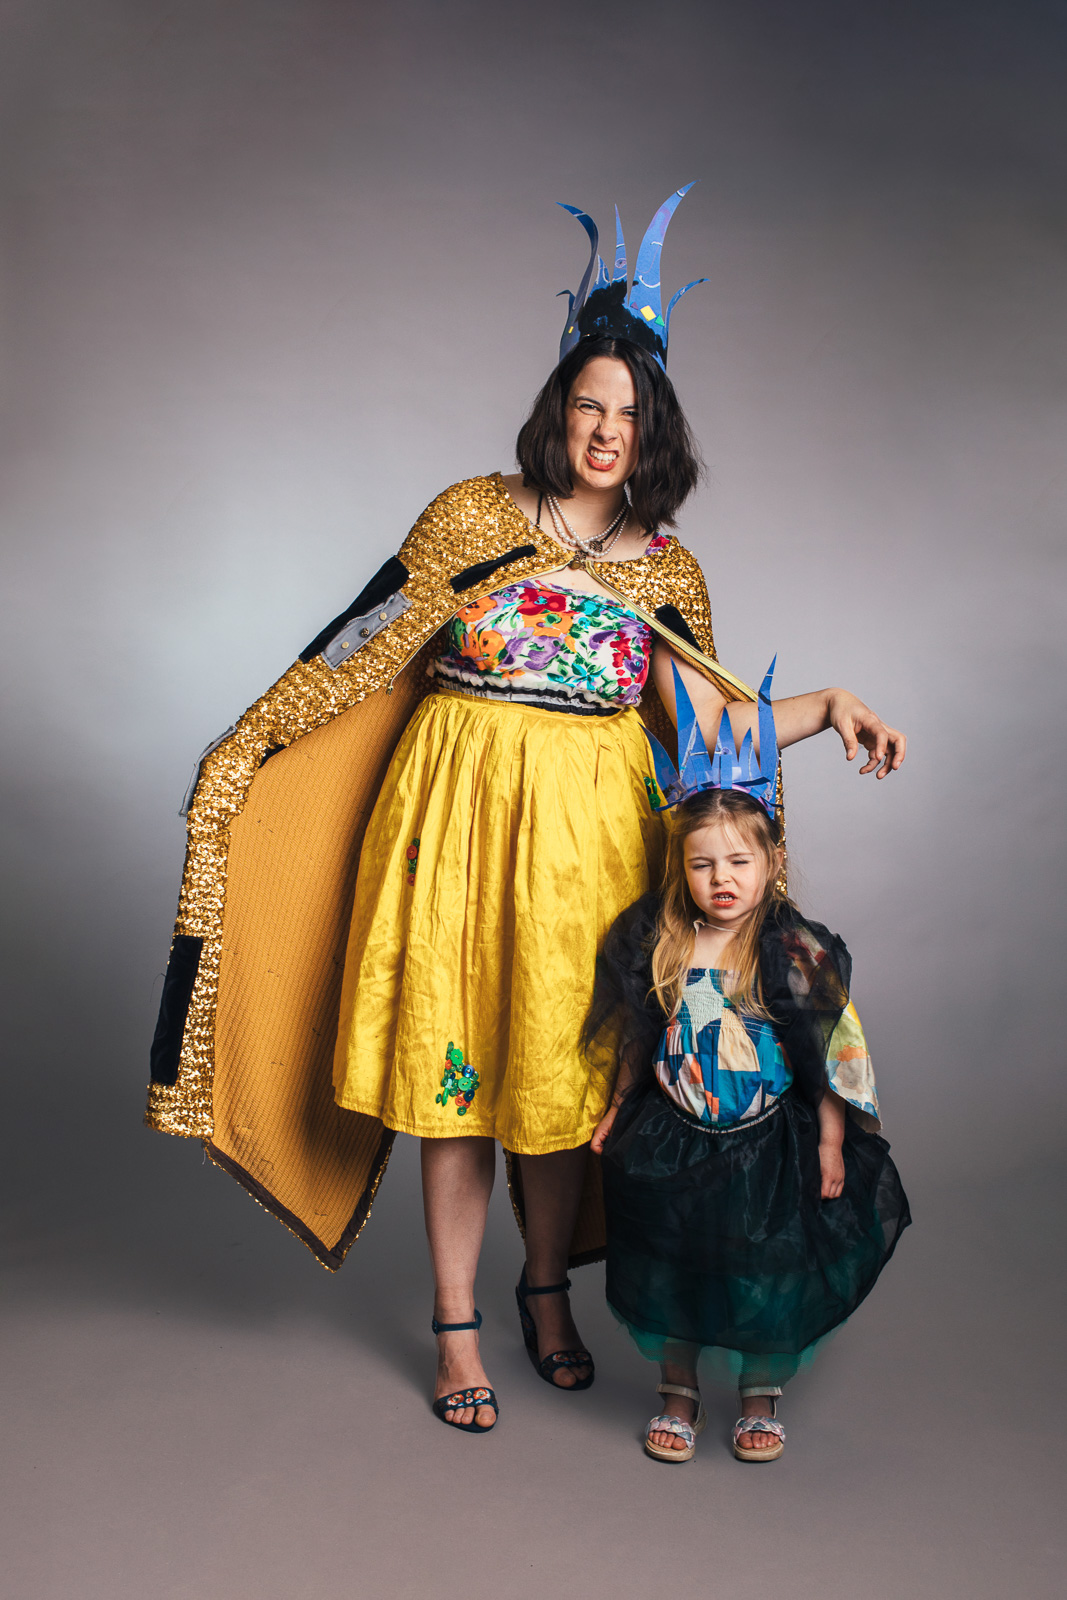 2023 Upcycled Fashion Show portraits by portrait artist, Kerry Struble, of Birch Blaze Studios located in Wakefield, NH. Mother & daughter Disney character-inspired costumes made with upcycled materials. @Birchblaze